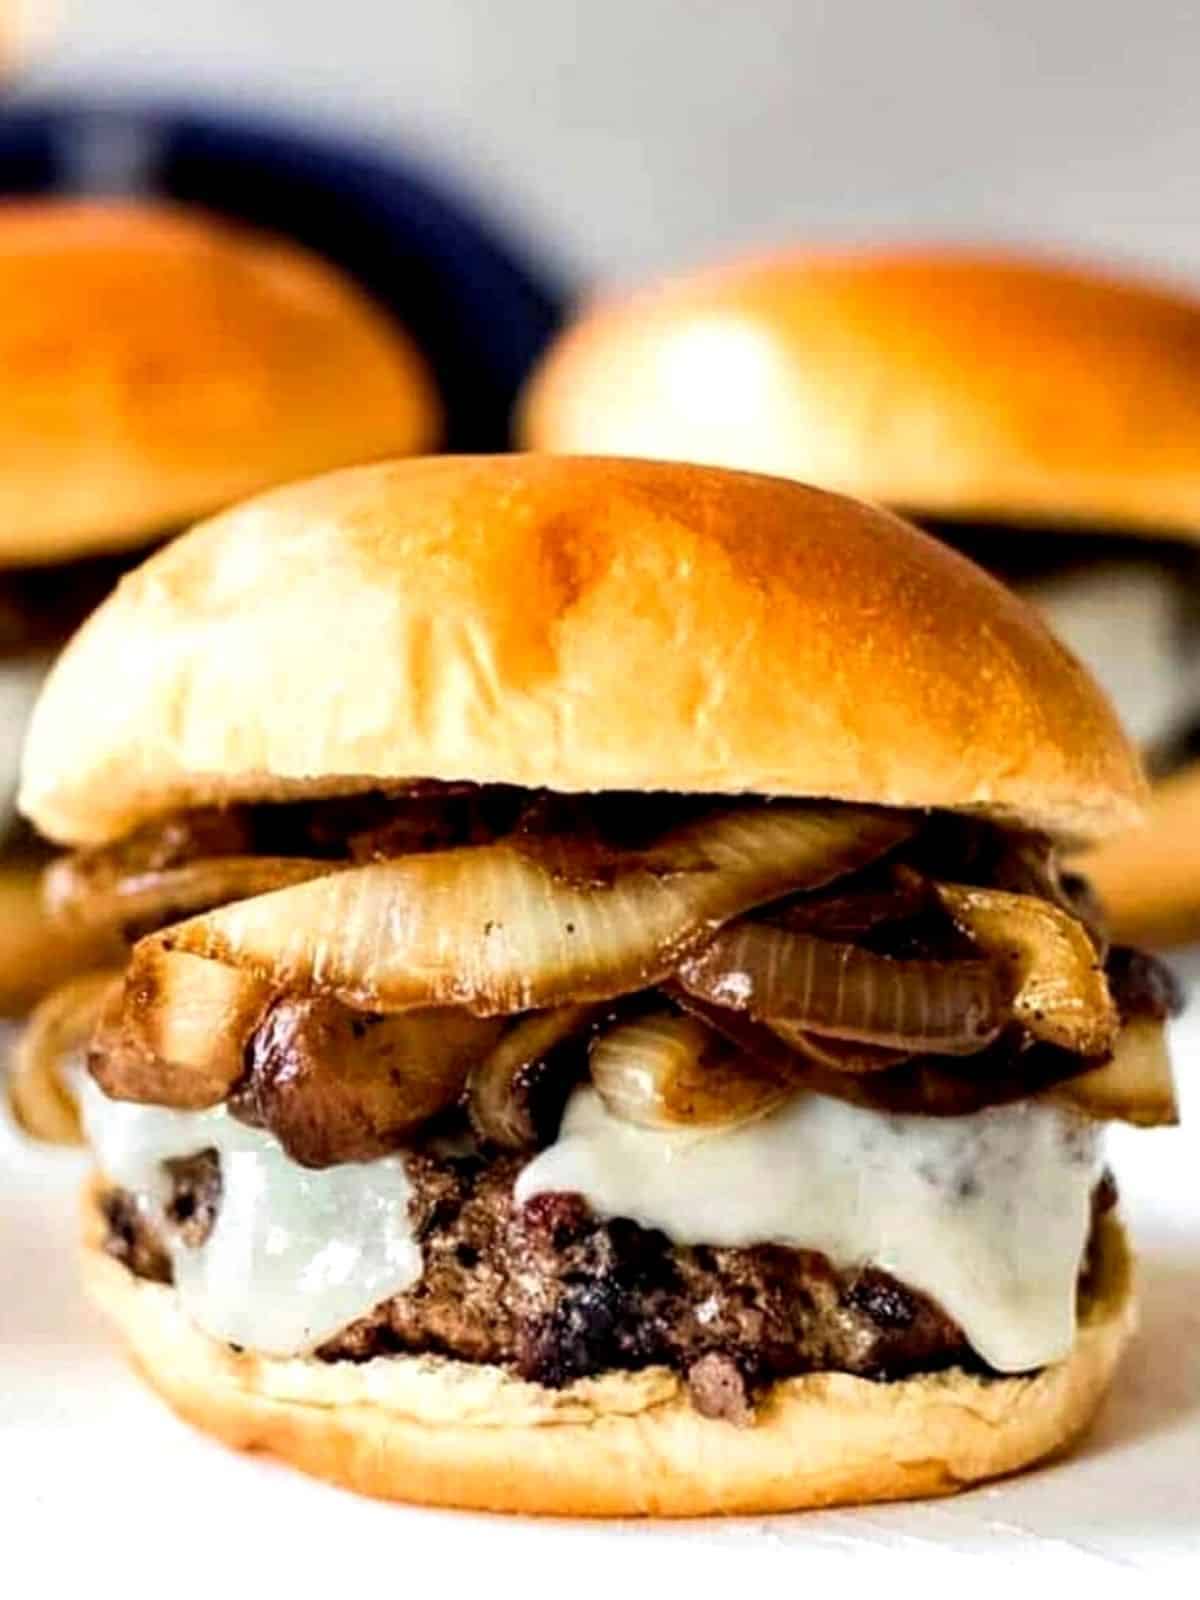 Mushroom burger with onions and cheese on a bun.